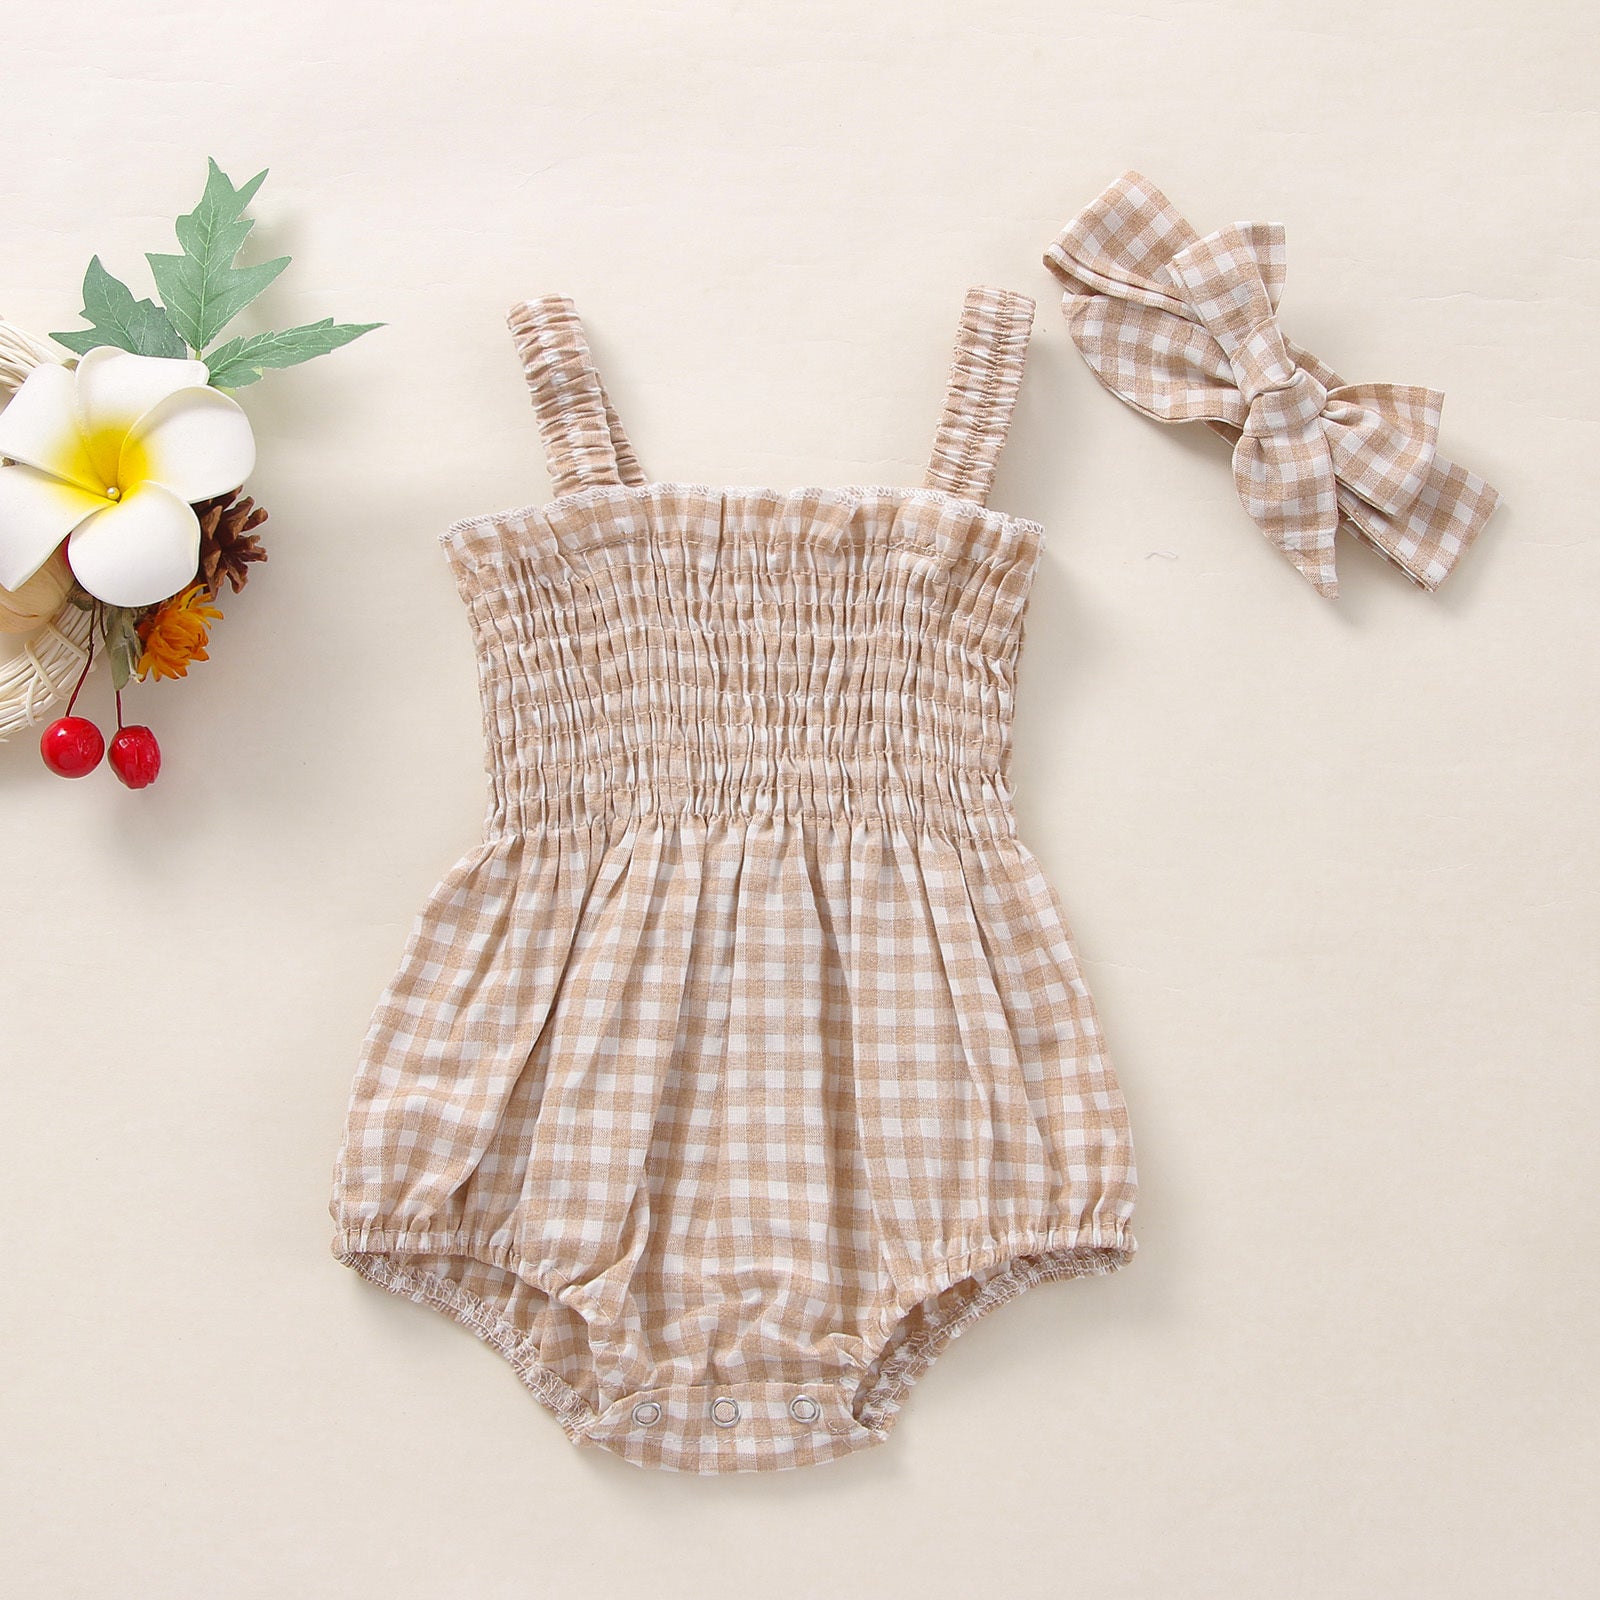 Infant Baby Girls 2Pcs Summer Outfits, Sleeveless Frill Smoc